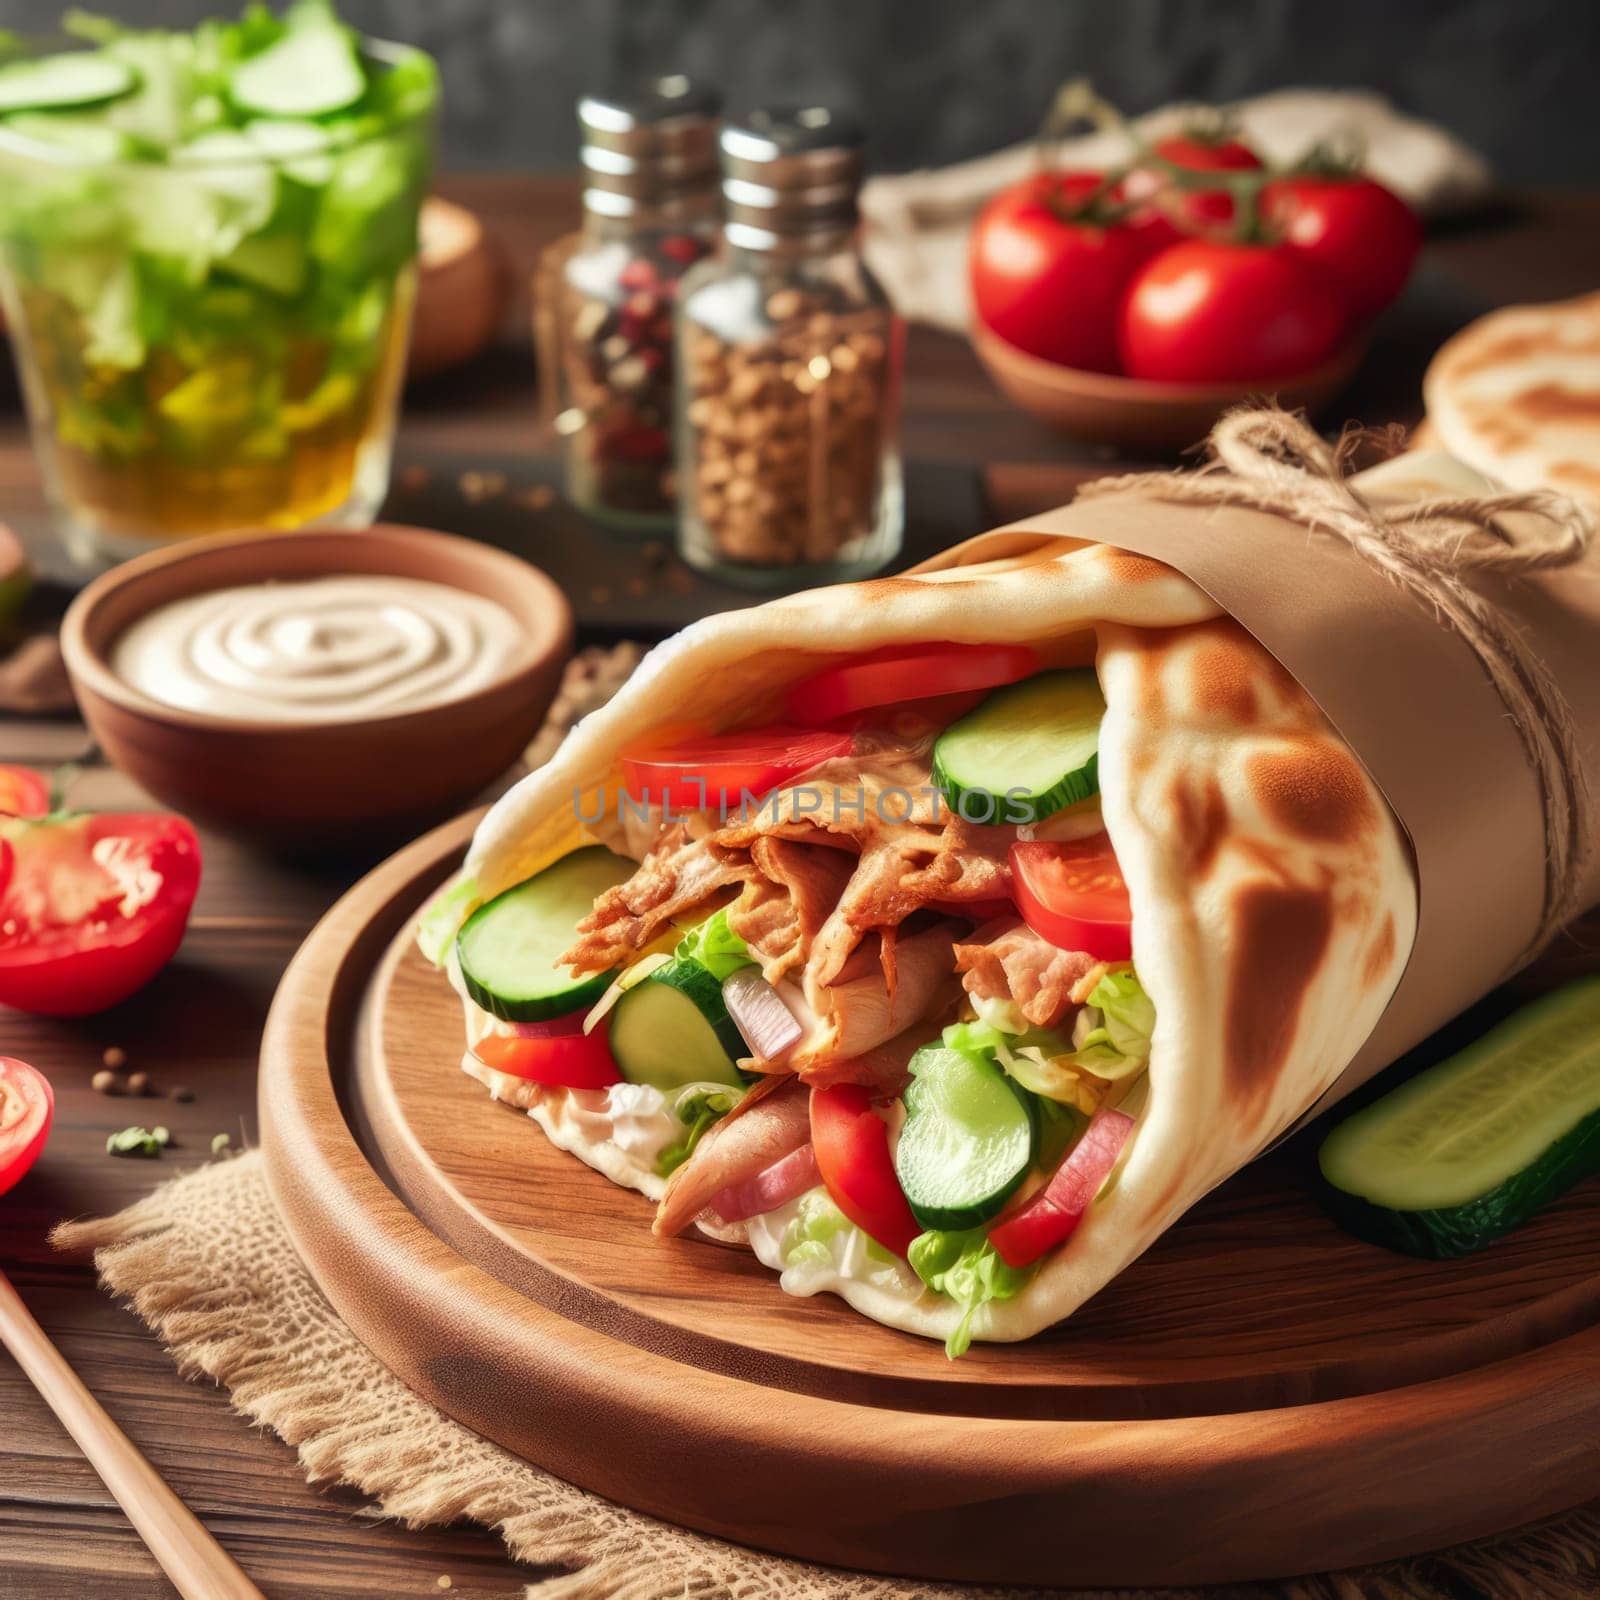 Delicious shawarma wrap on a wooden plate, with fresh vegetables and spices in the background